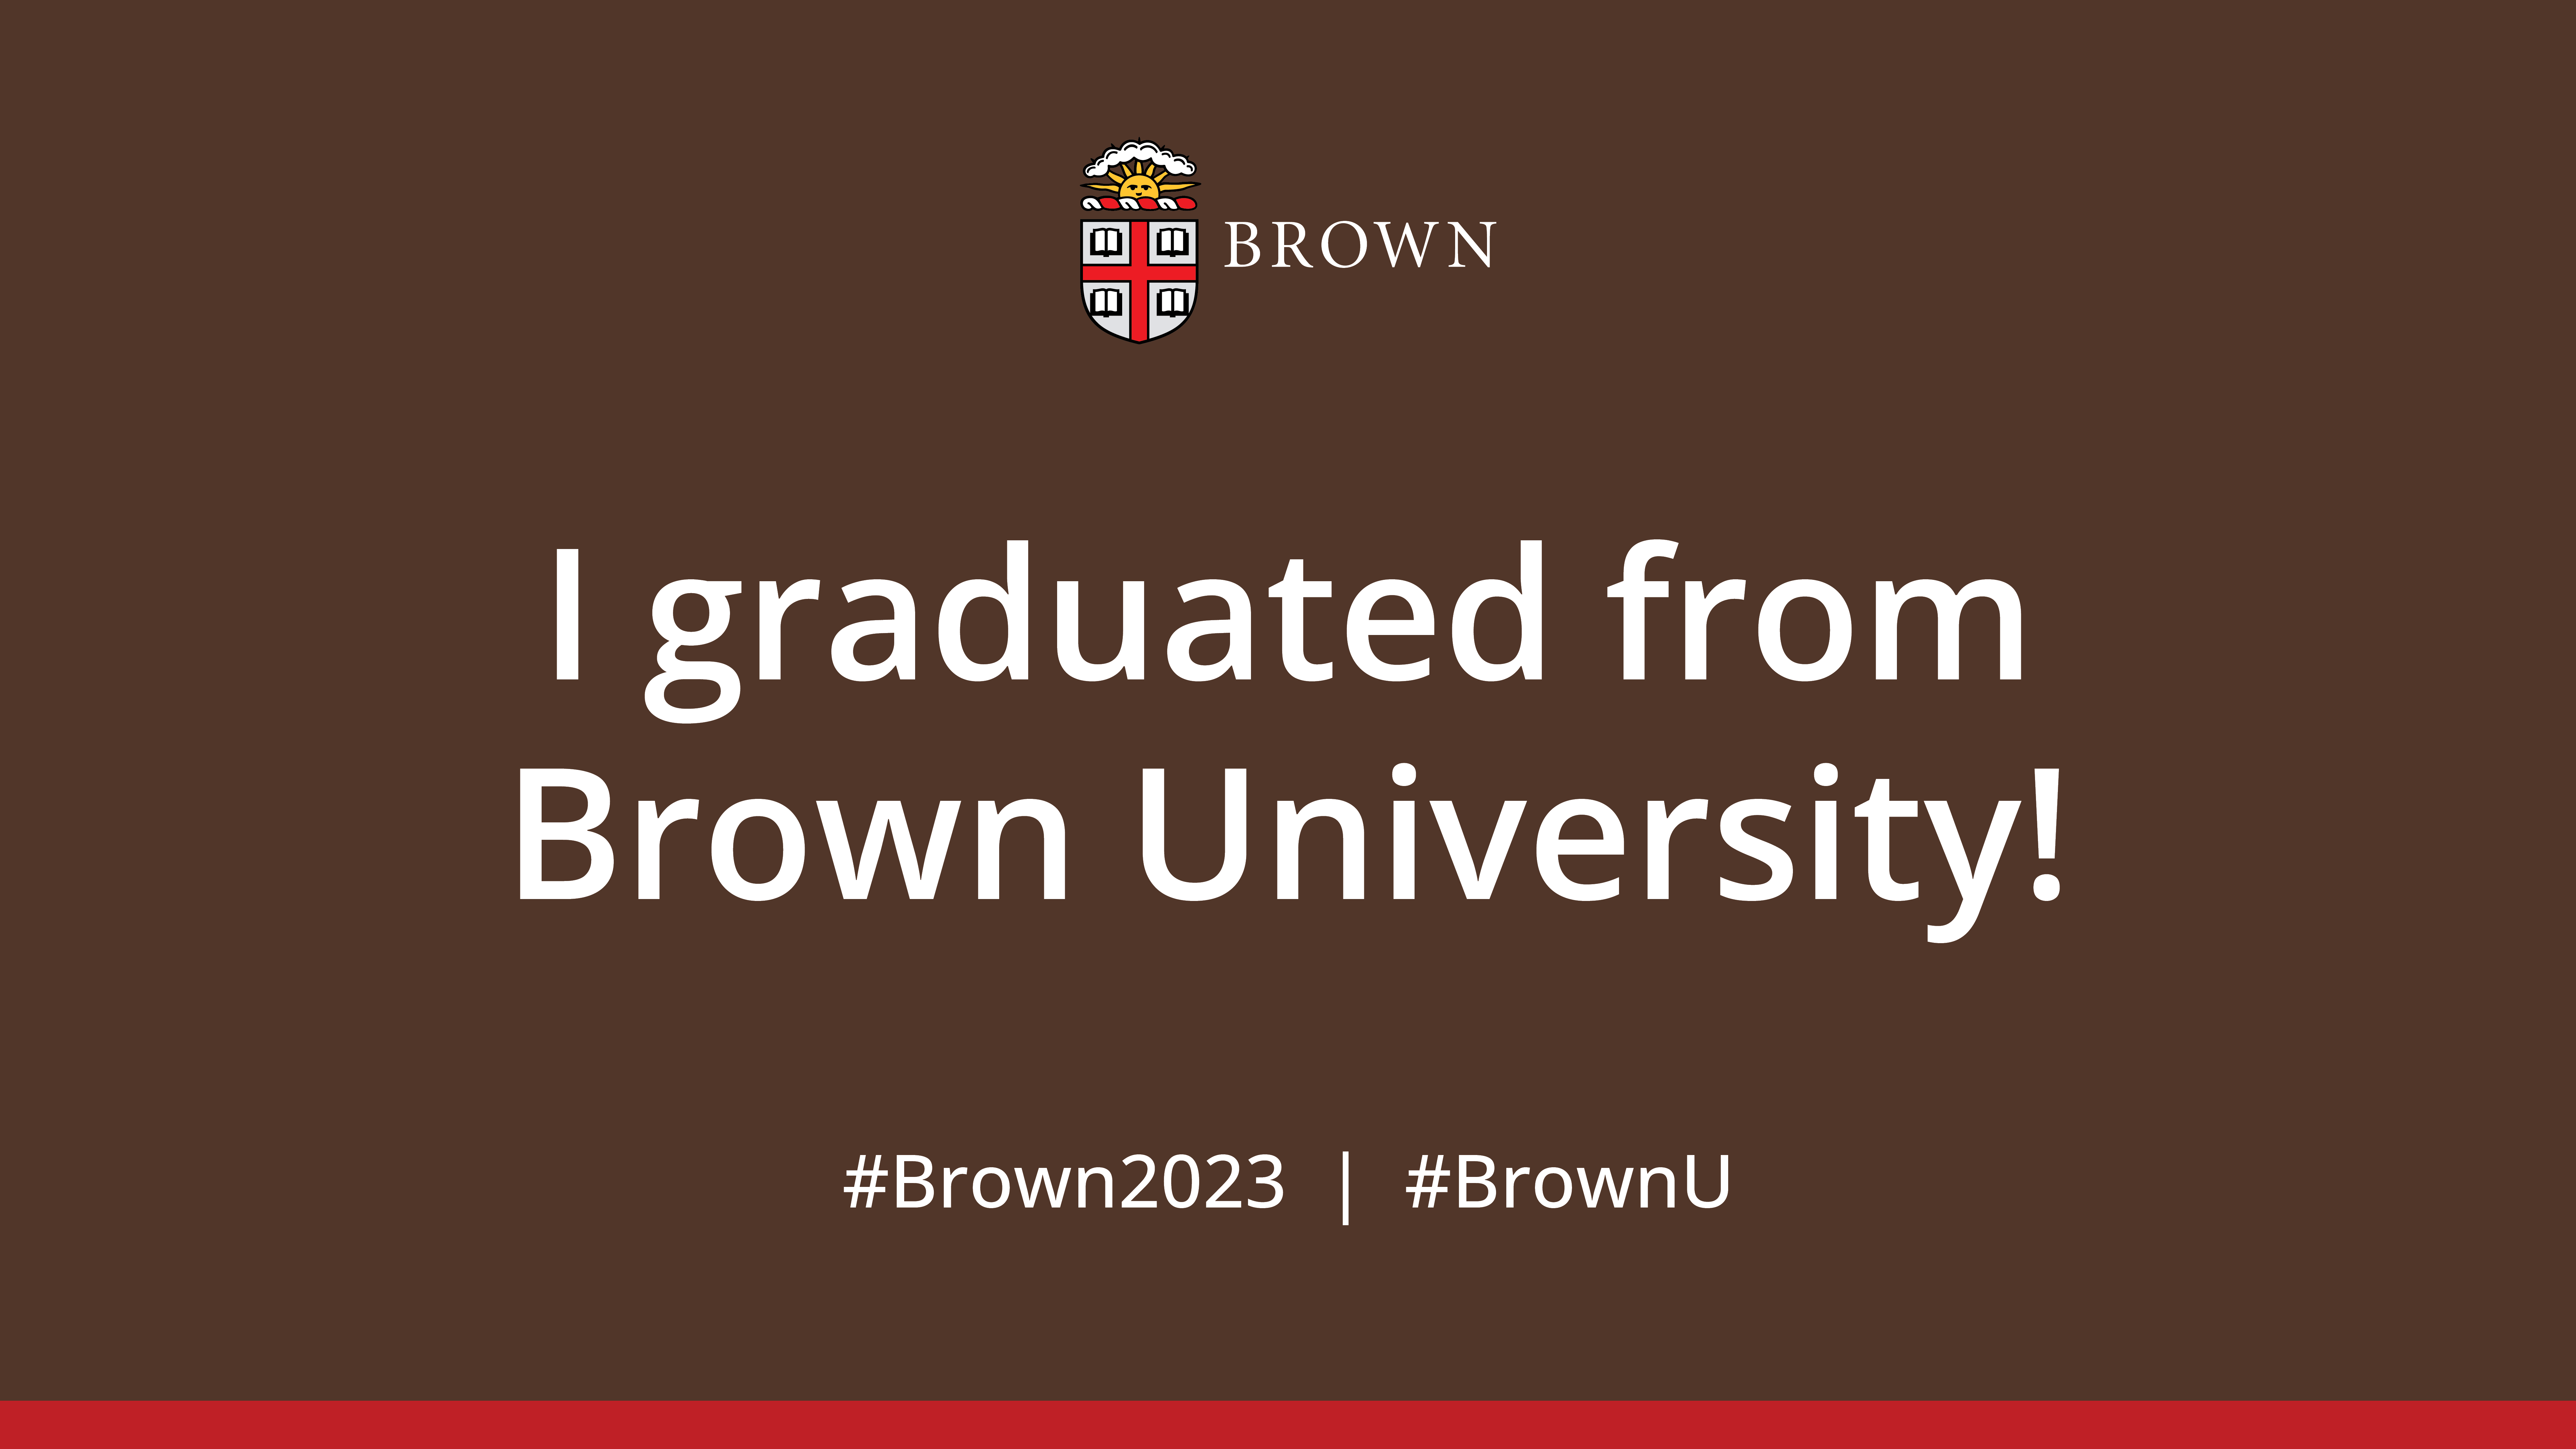 I graduated from Brown poster with brown background